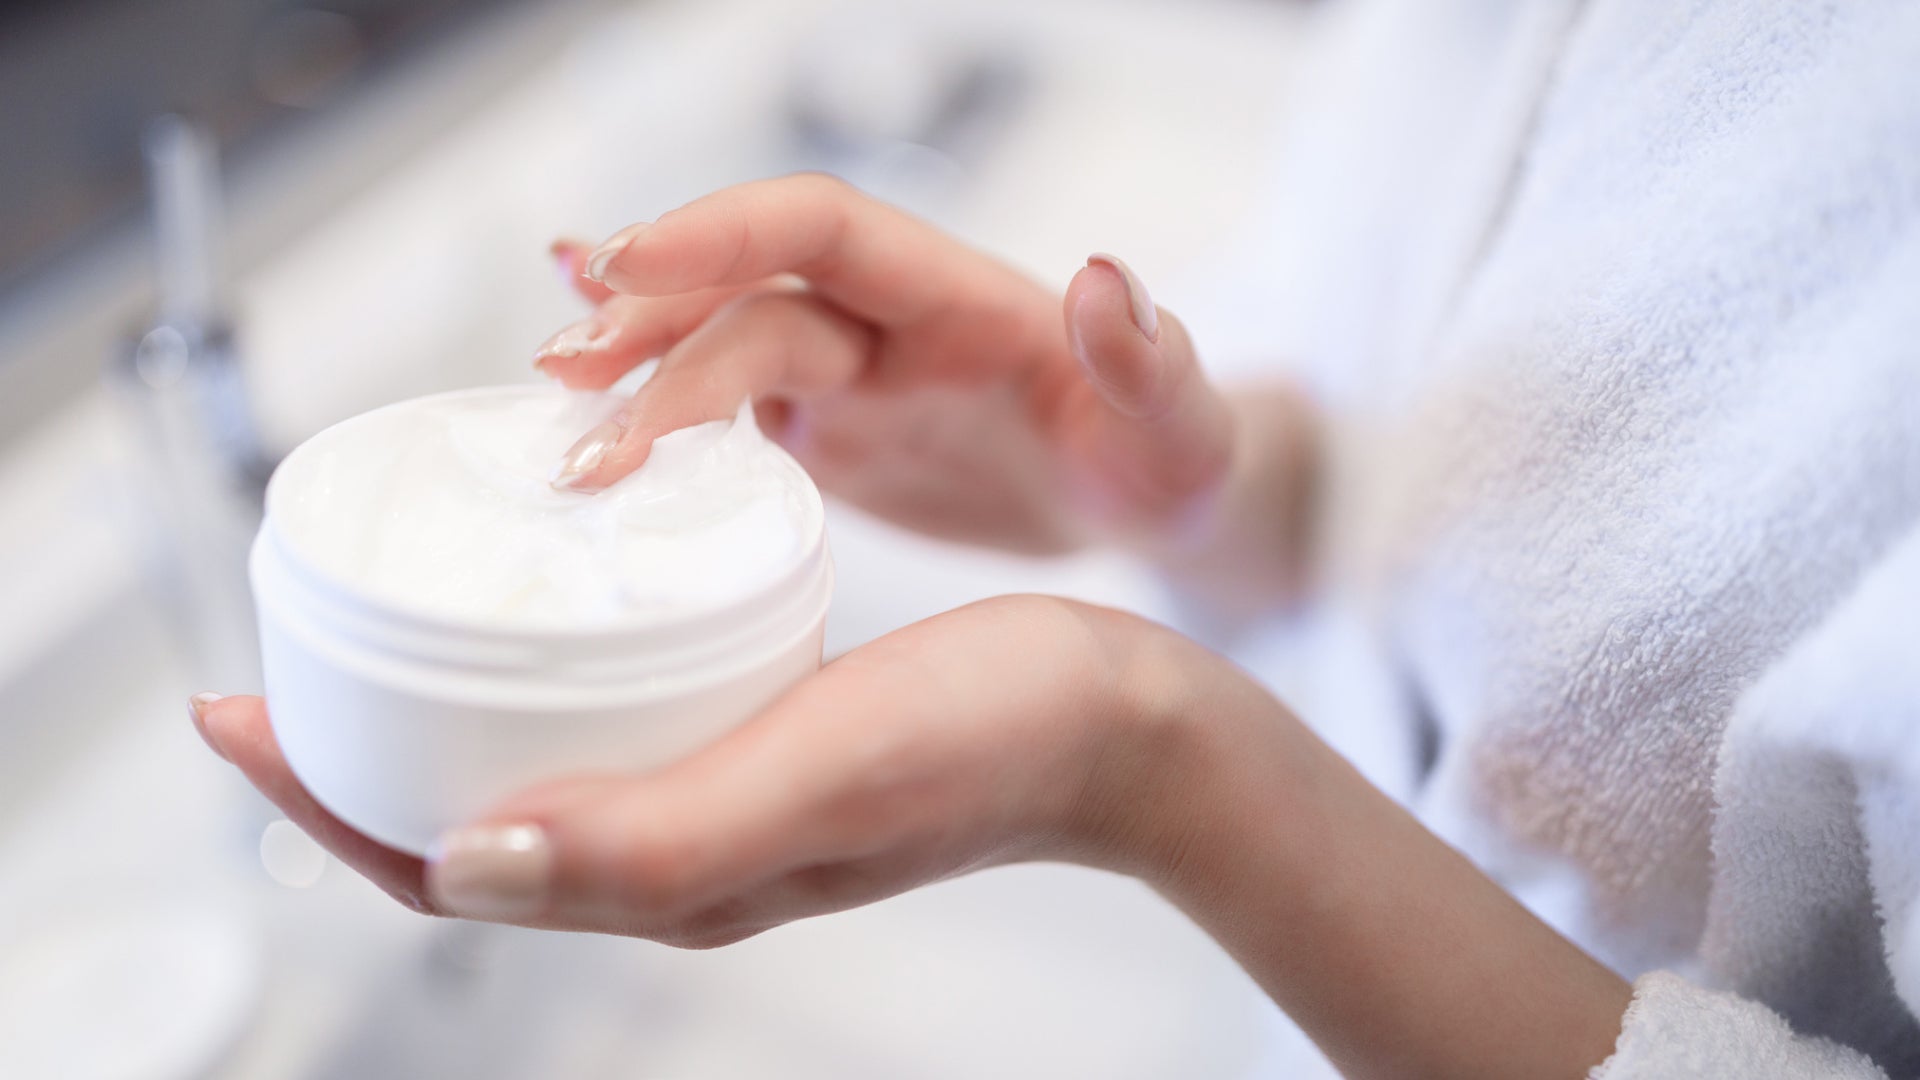 Topical Treatments for Psoriasis: Exploring Creams, Lotions and Petroleum Jelly